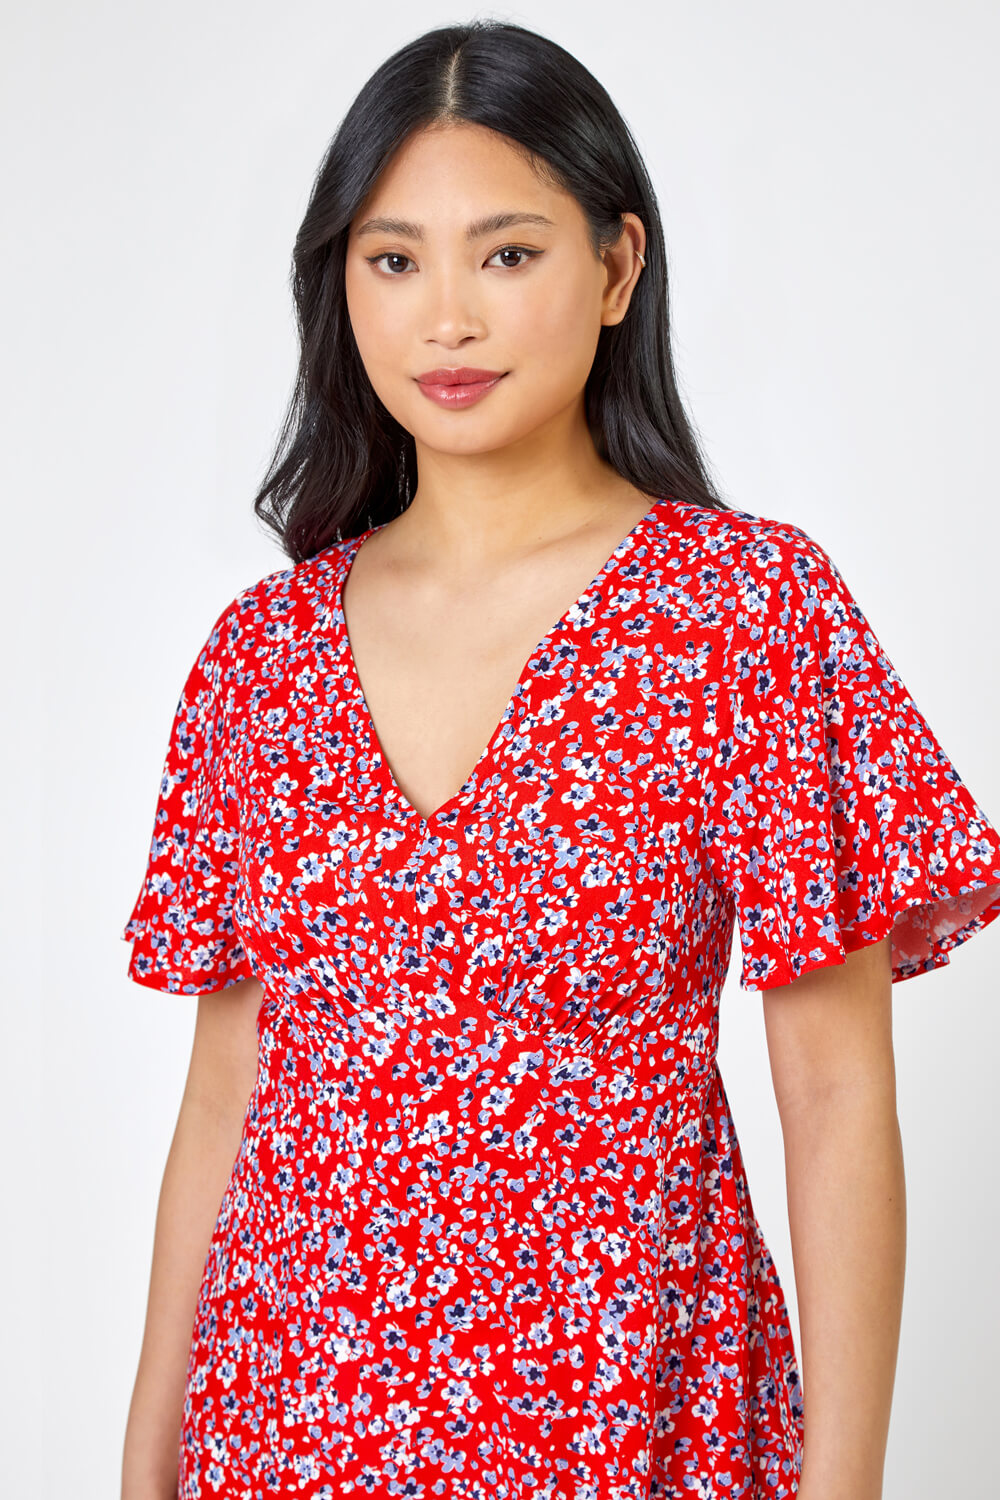 Red Petite Floral Print Flute Sleeve Dress, Image 4 of 5